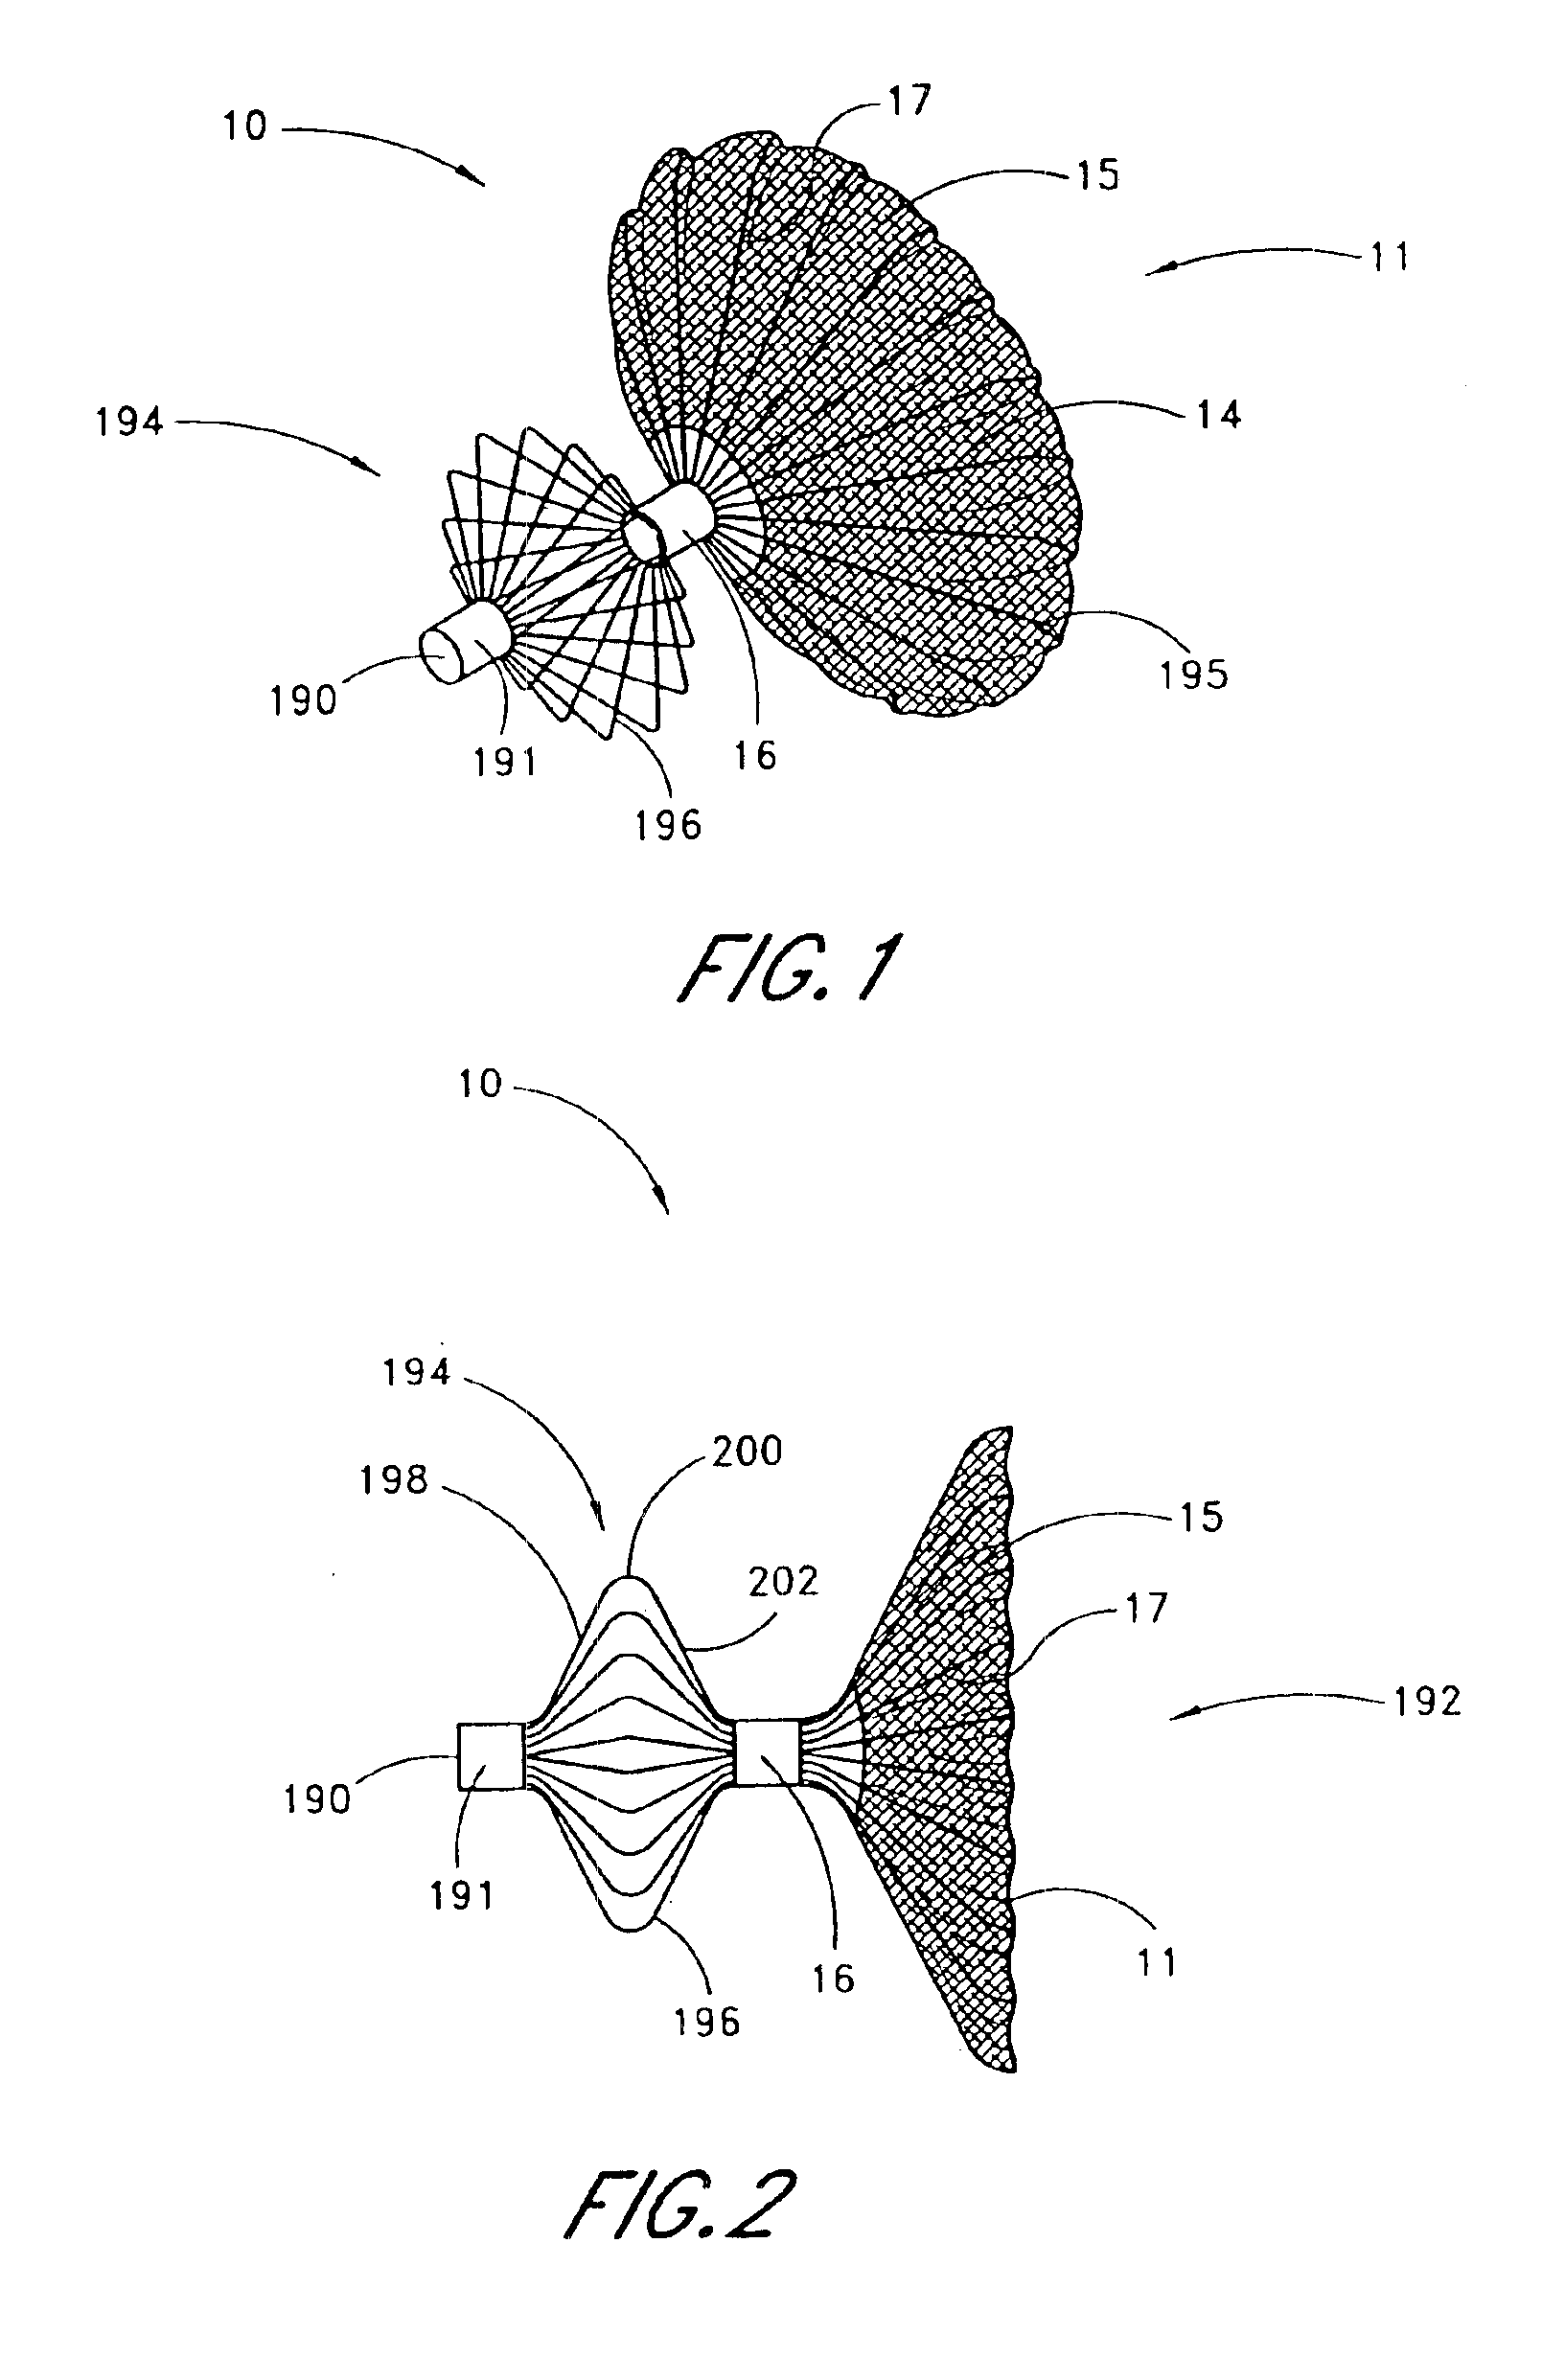 Method of implanting a device in the left atrial appendage